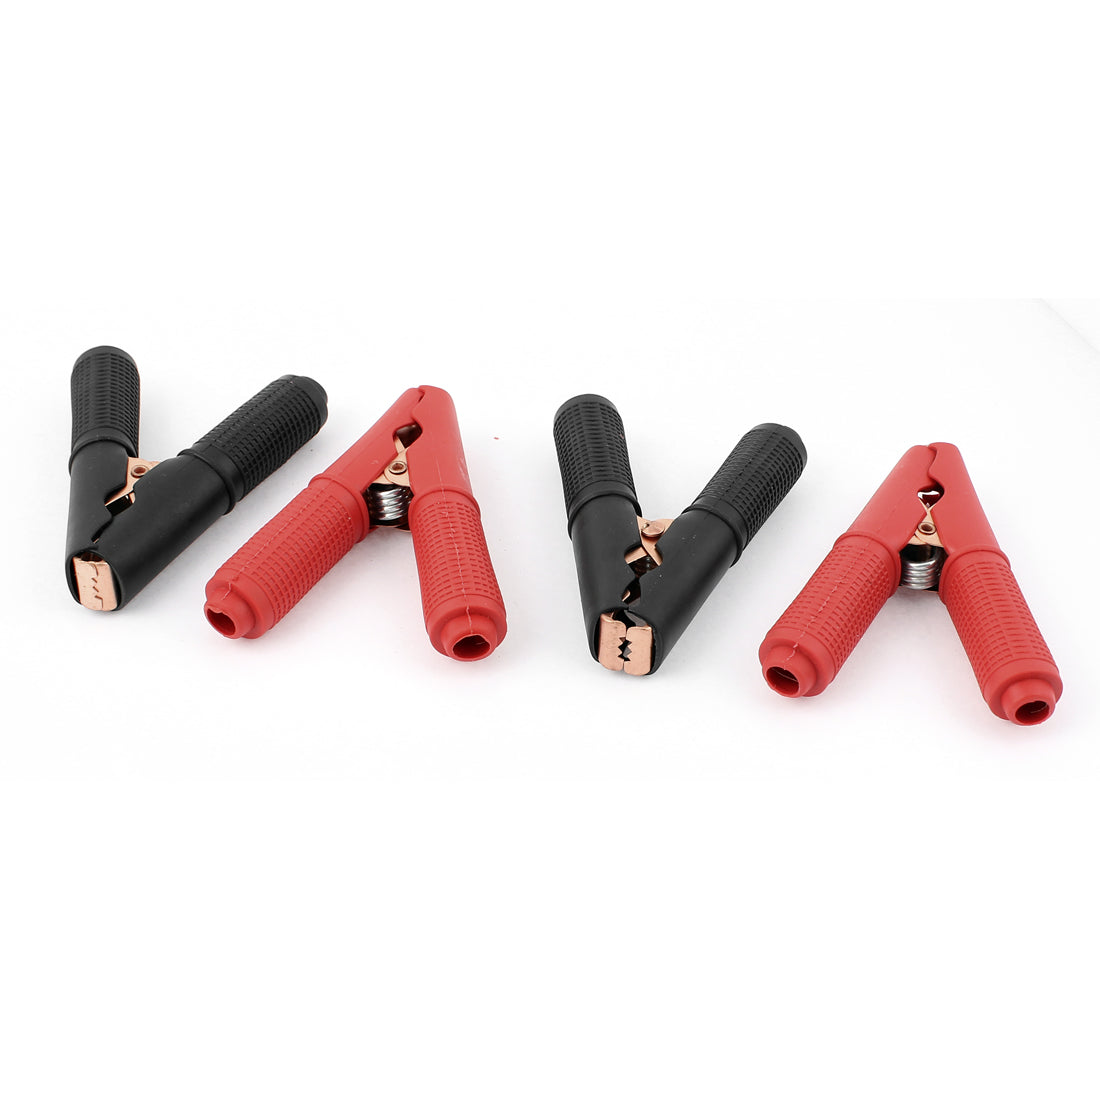 uxcell Uxcell 85A 380V Insulated Alligator Clips Test Work Crocodile Clamps 4pcs Black Red